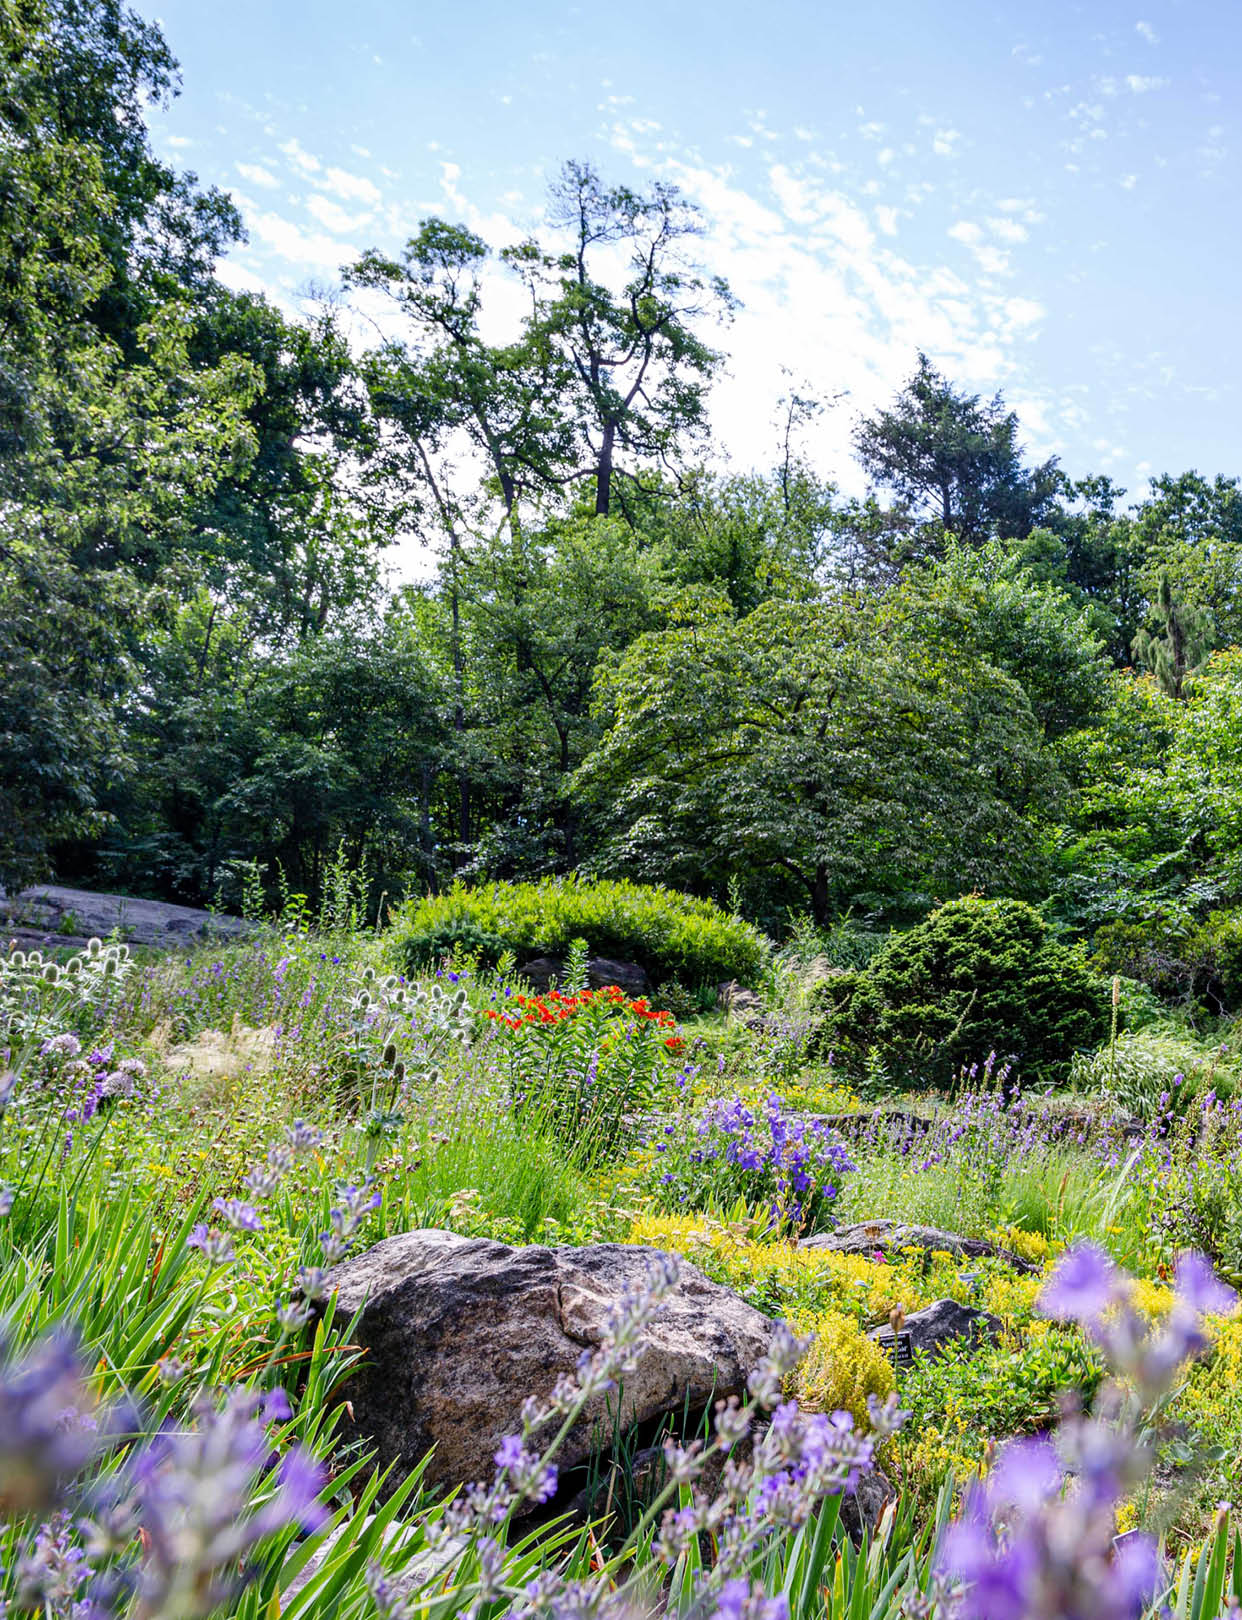 A collection of purple and red Alpine flowers blooms among sunny, green foliage and a backdrop of lush trees in the Rock Garden 